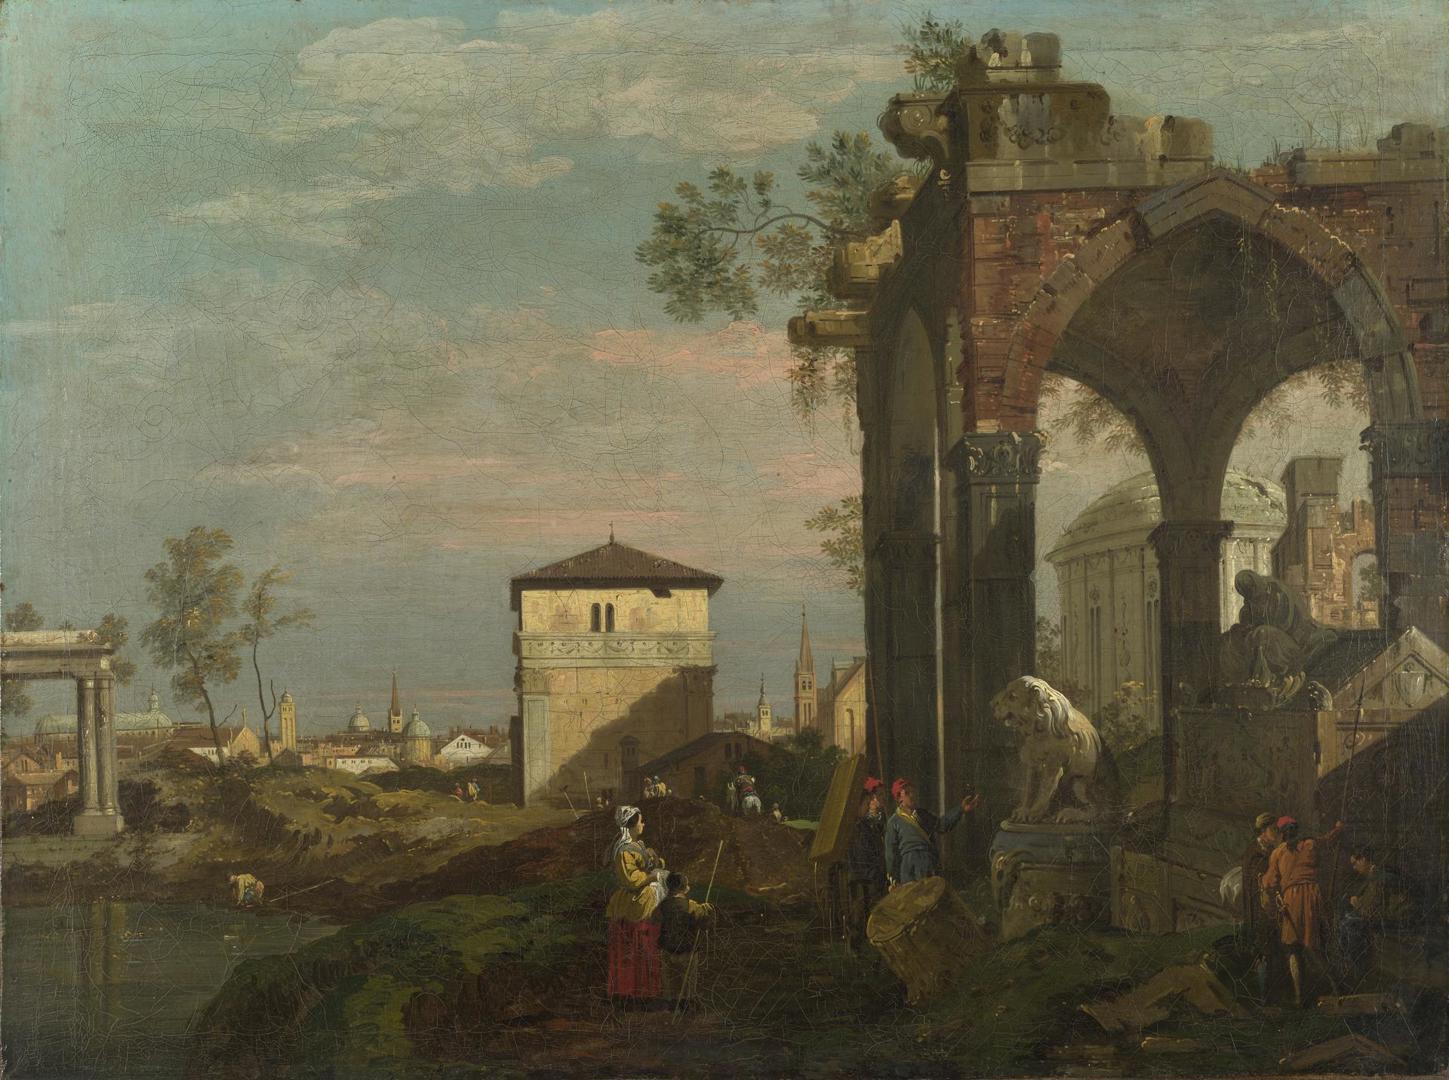 A Caprice Landscape with Ruins by Style of Bernardo Bellotto